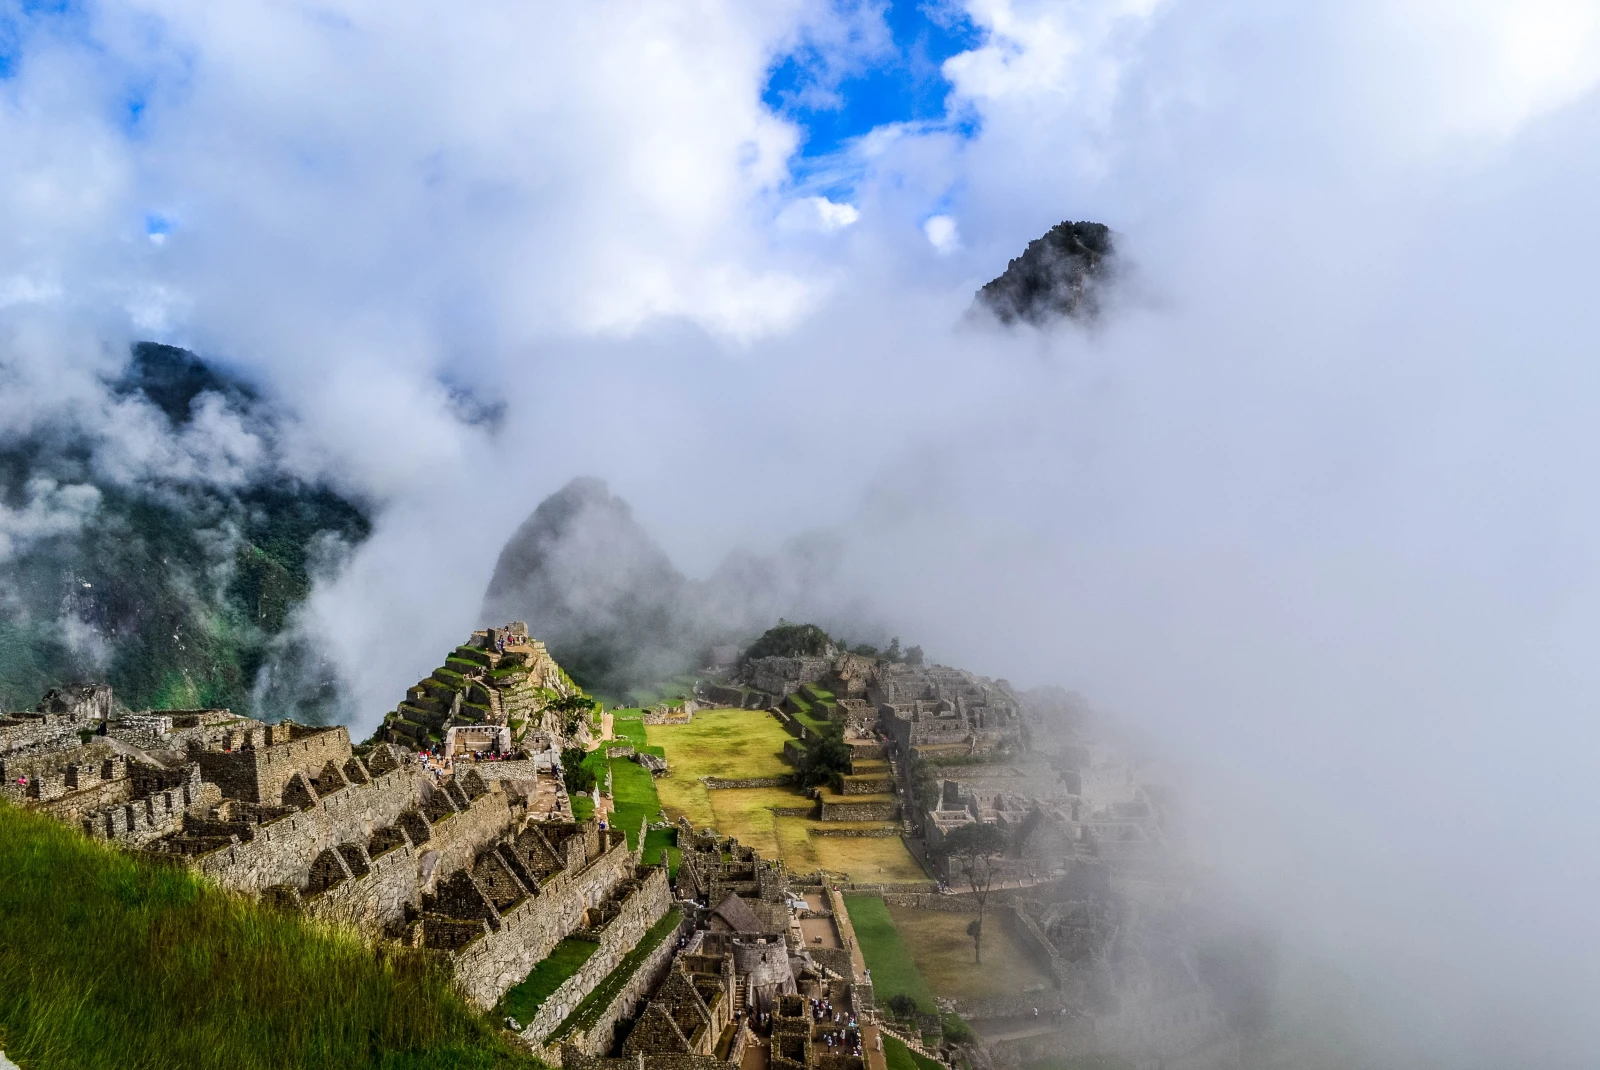 White clouds moving over Huchuy Picchu in Peru with green grass and brown stone ruins.